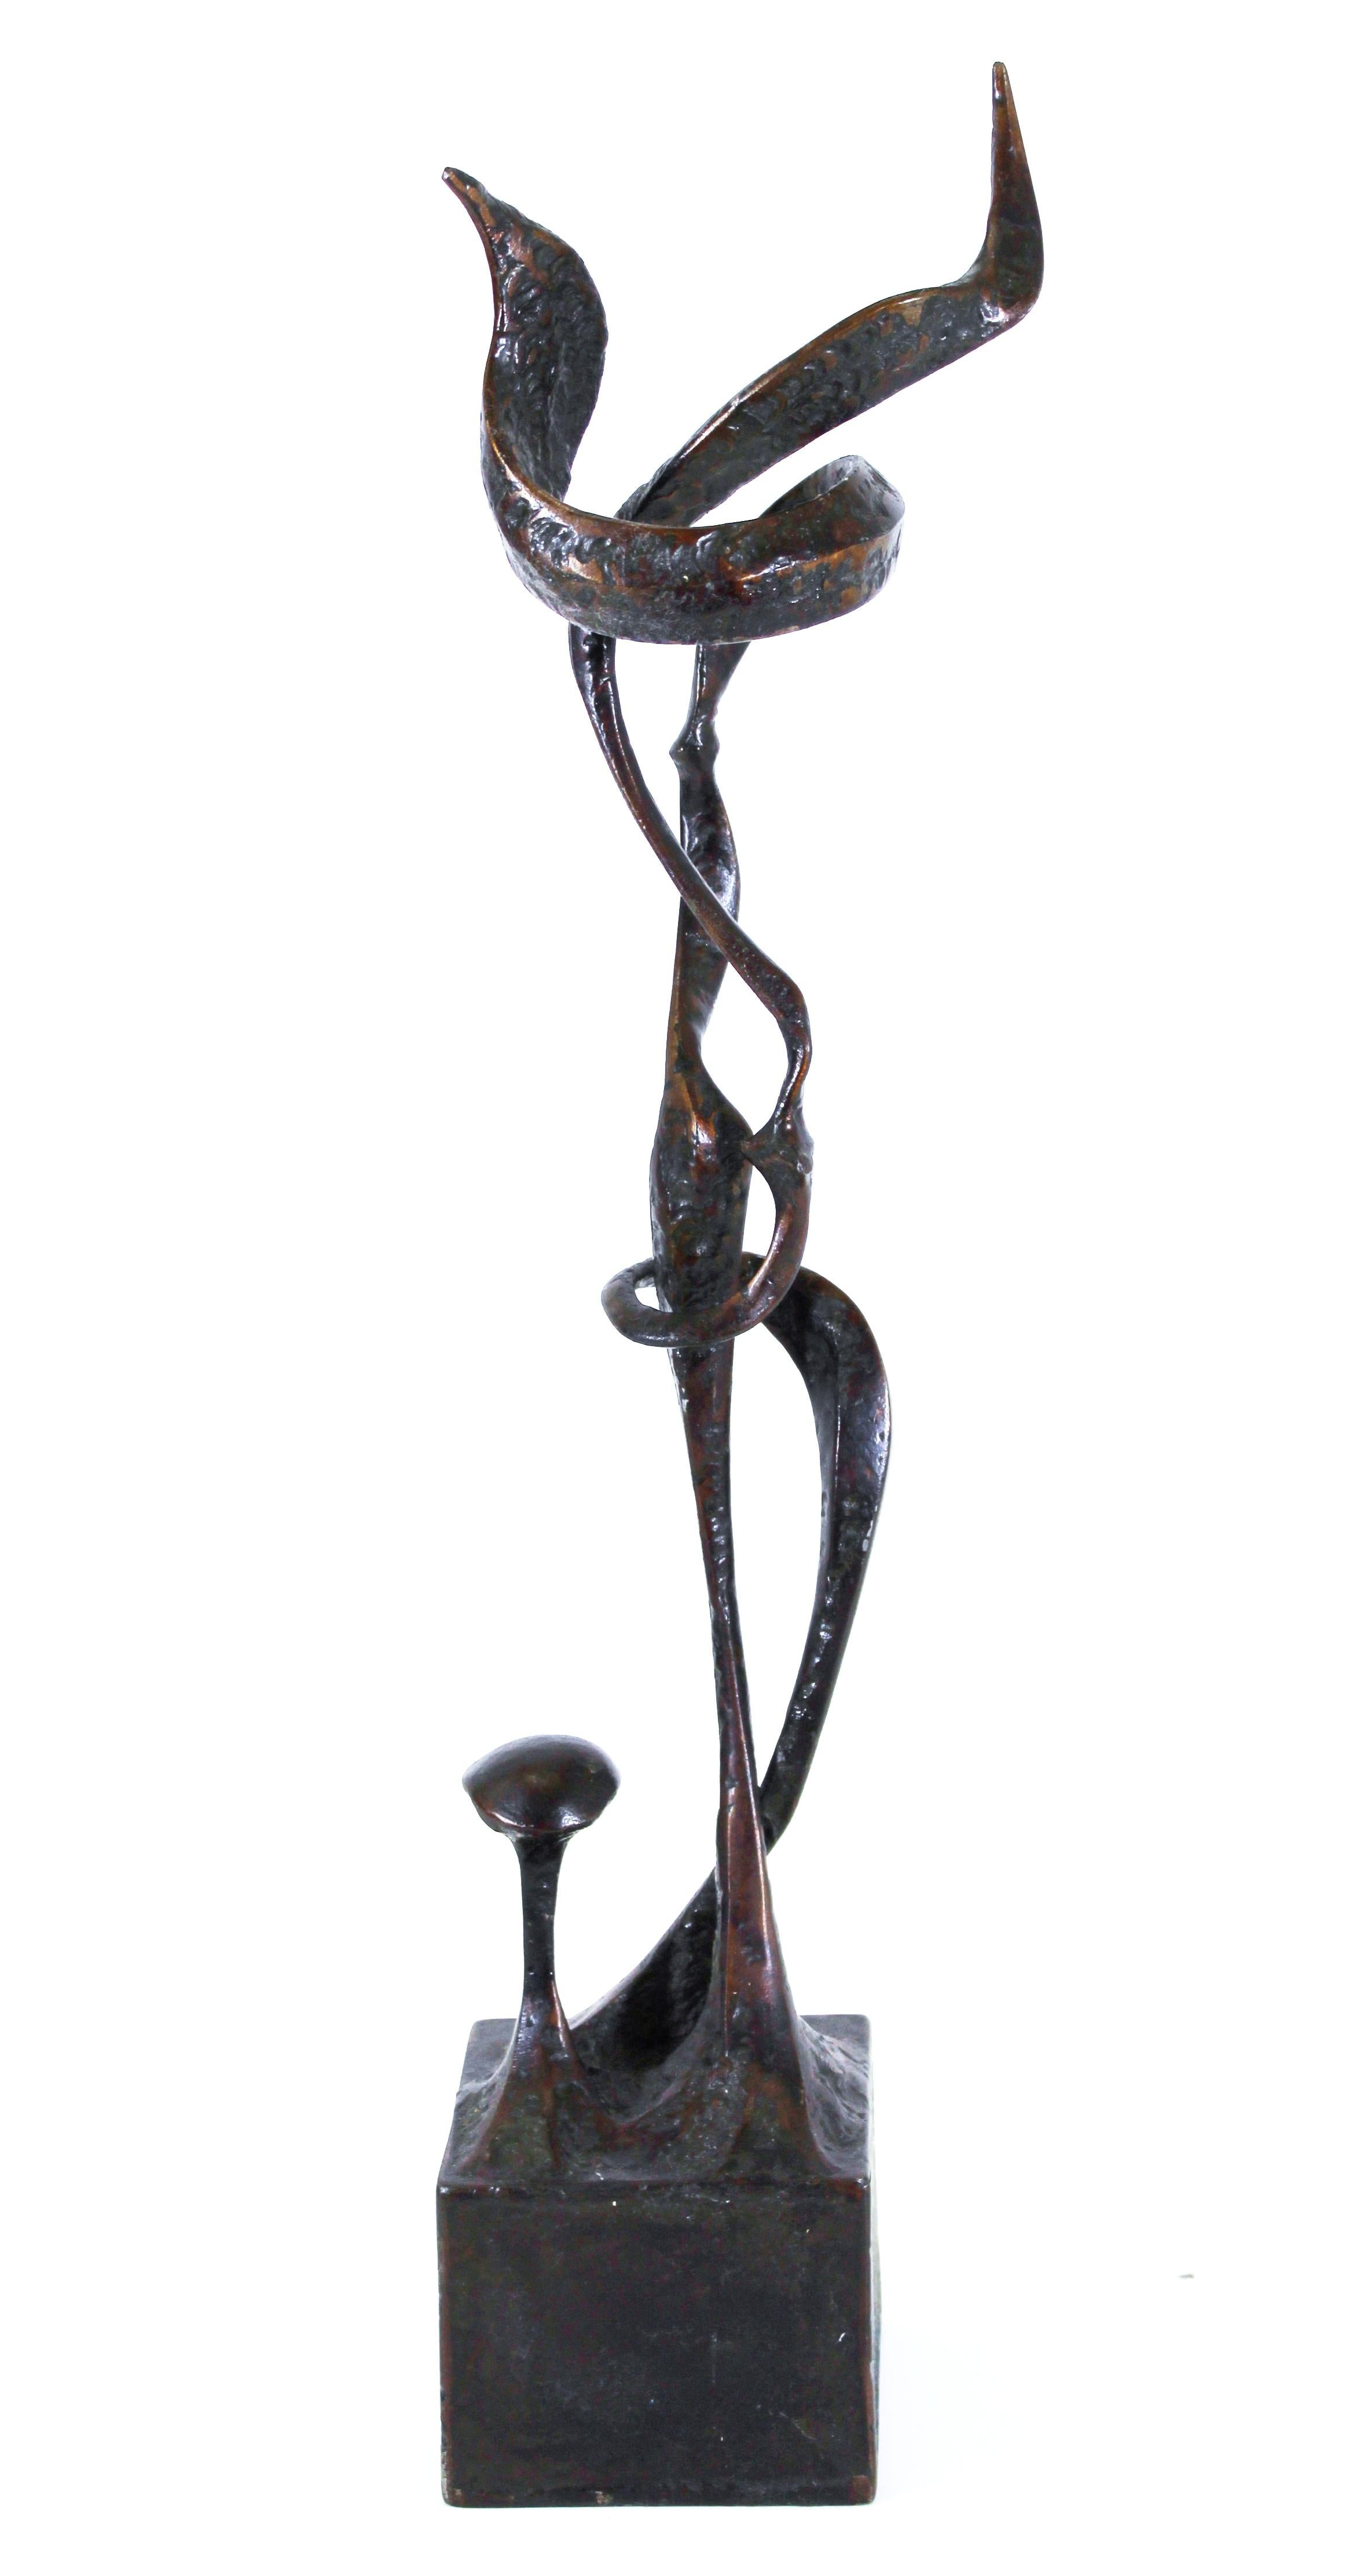 American Surrealist welded bronze sculpture depicting a surrealist alien plant life. Made during the 1970's in the United States, the piece is illegibly signed on the side of the base.